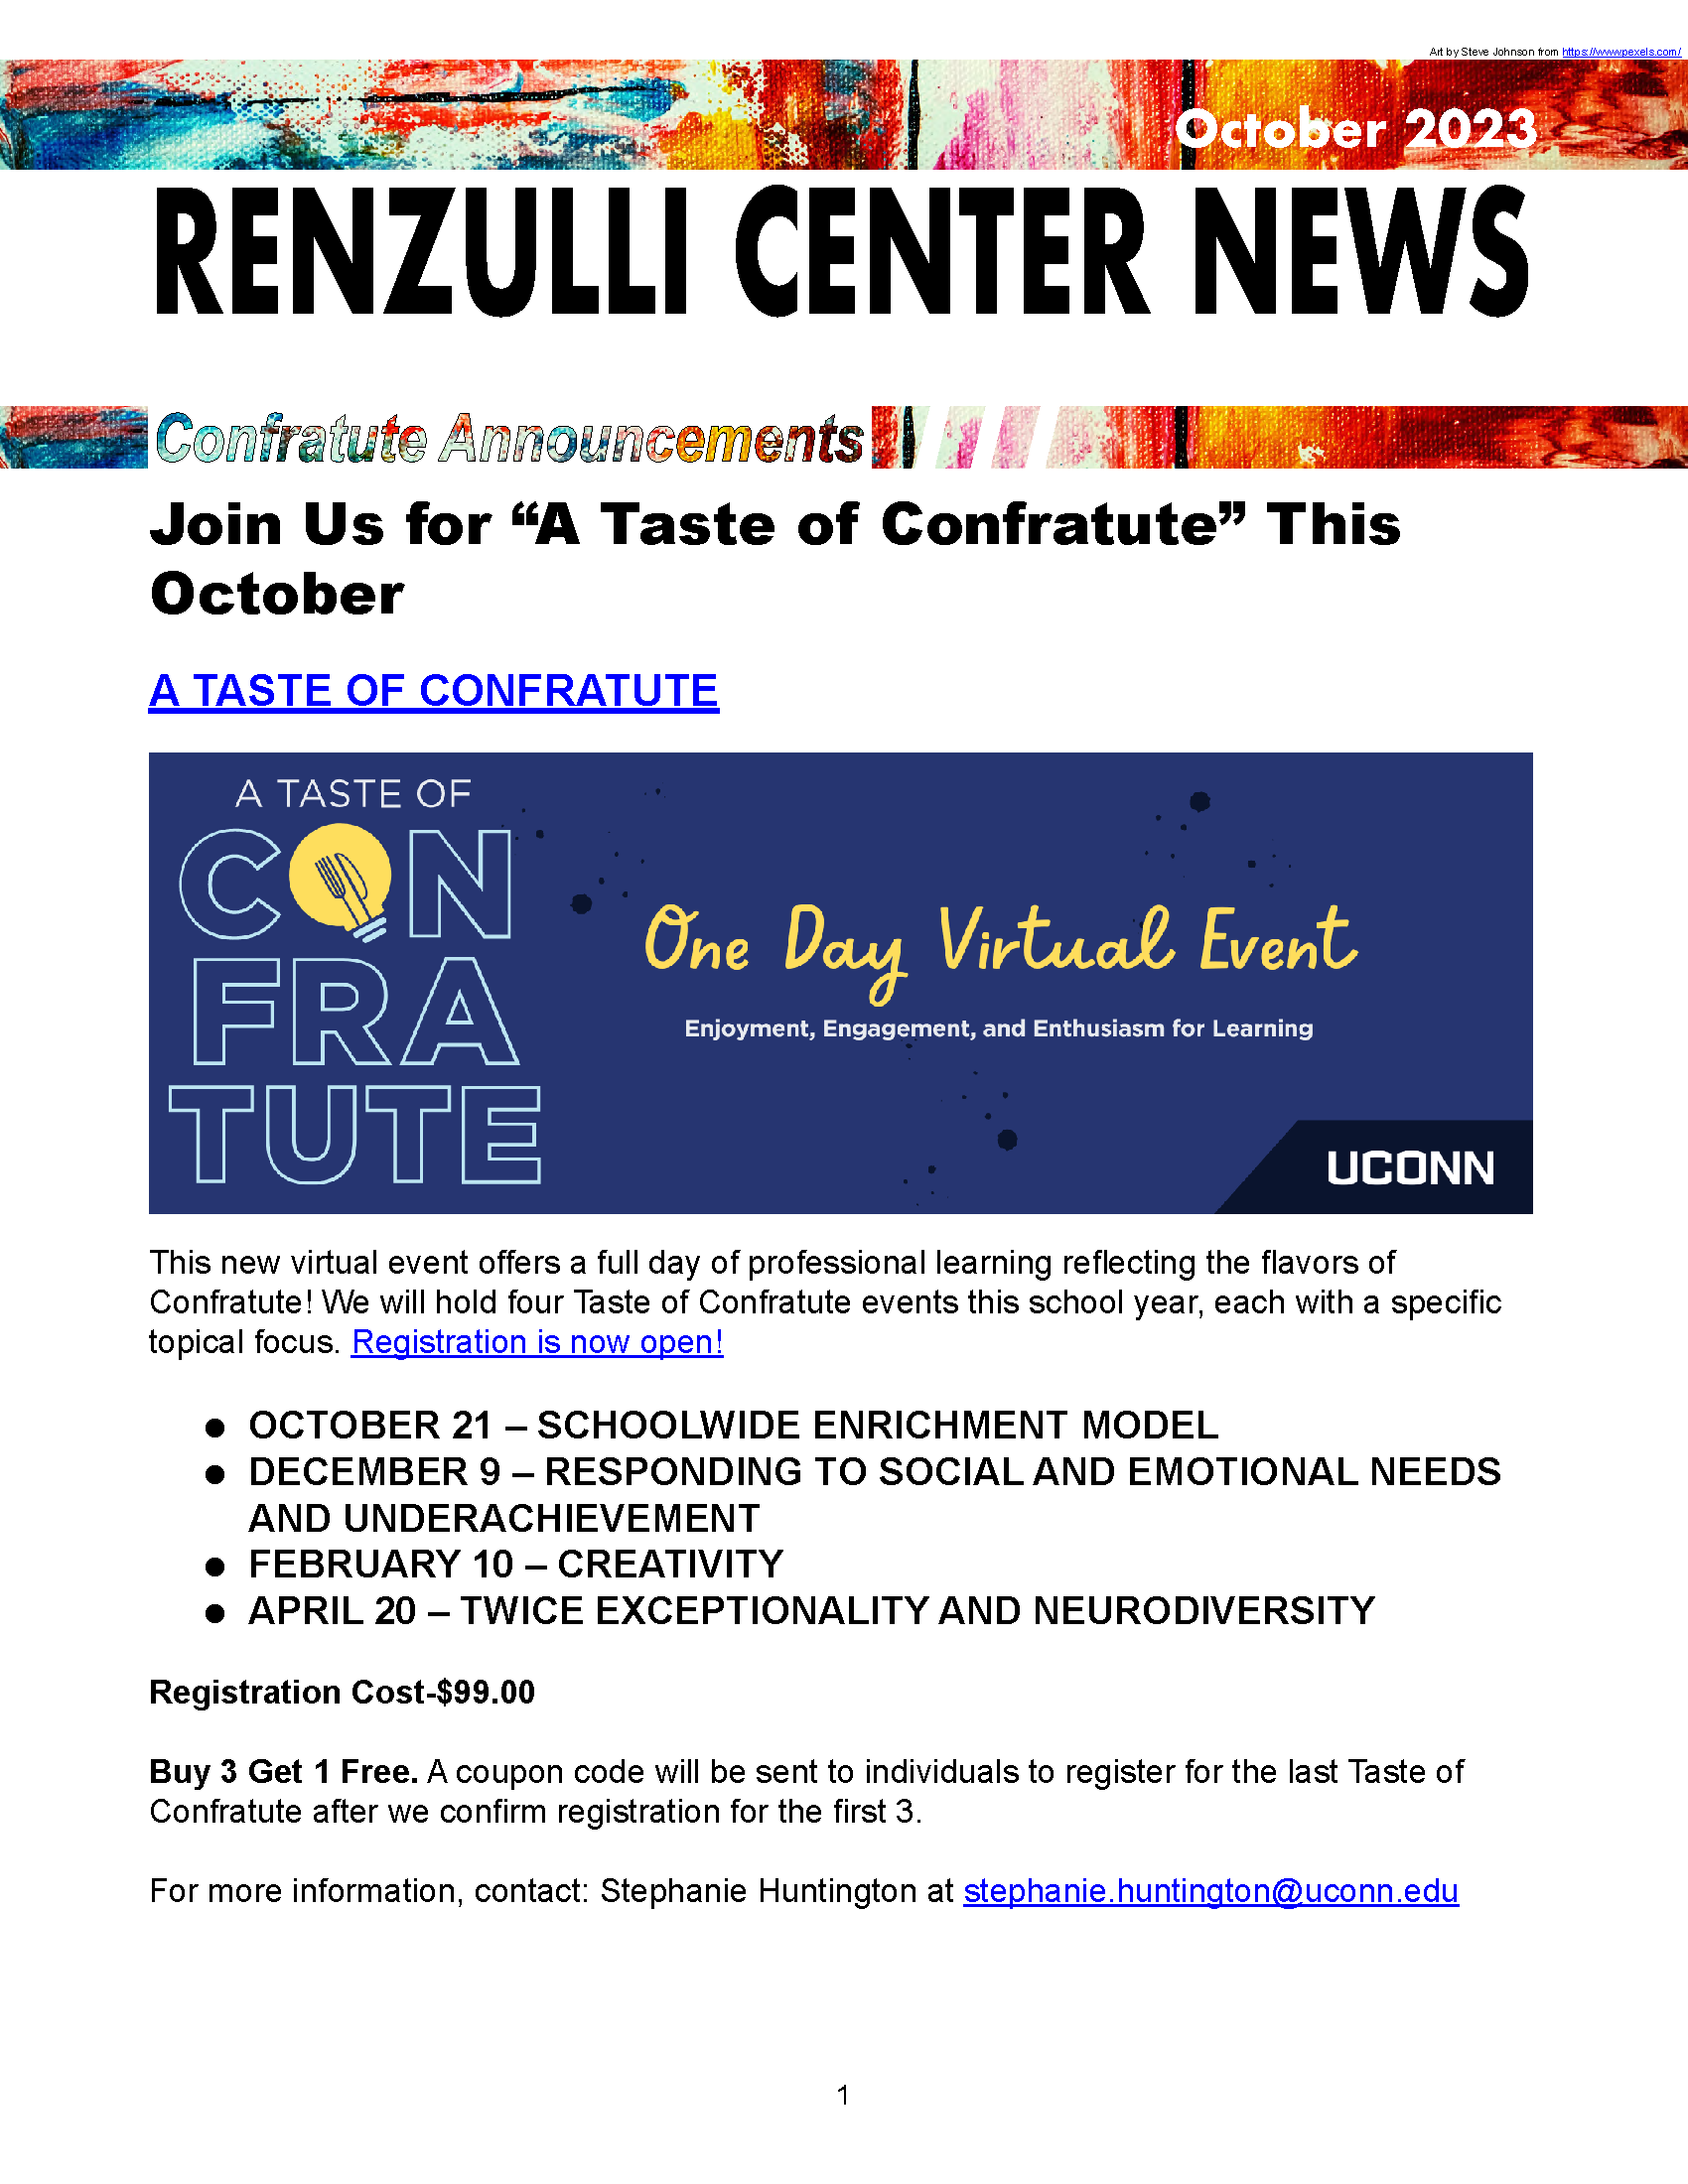 October 2023 Renzulli News Cover Graphic